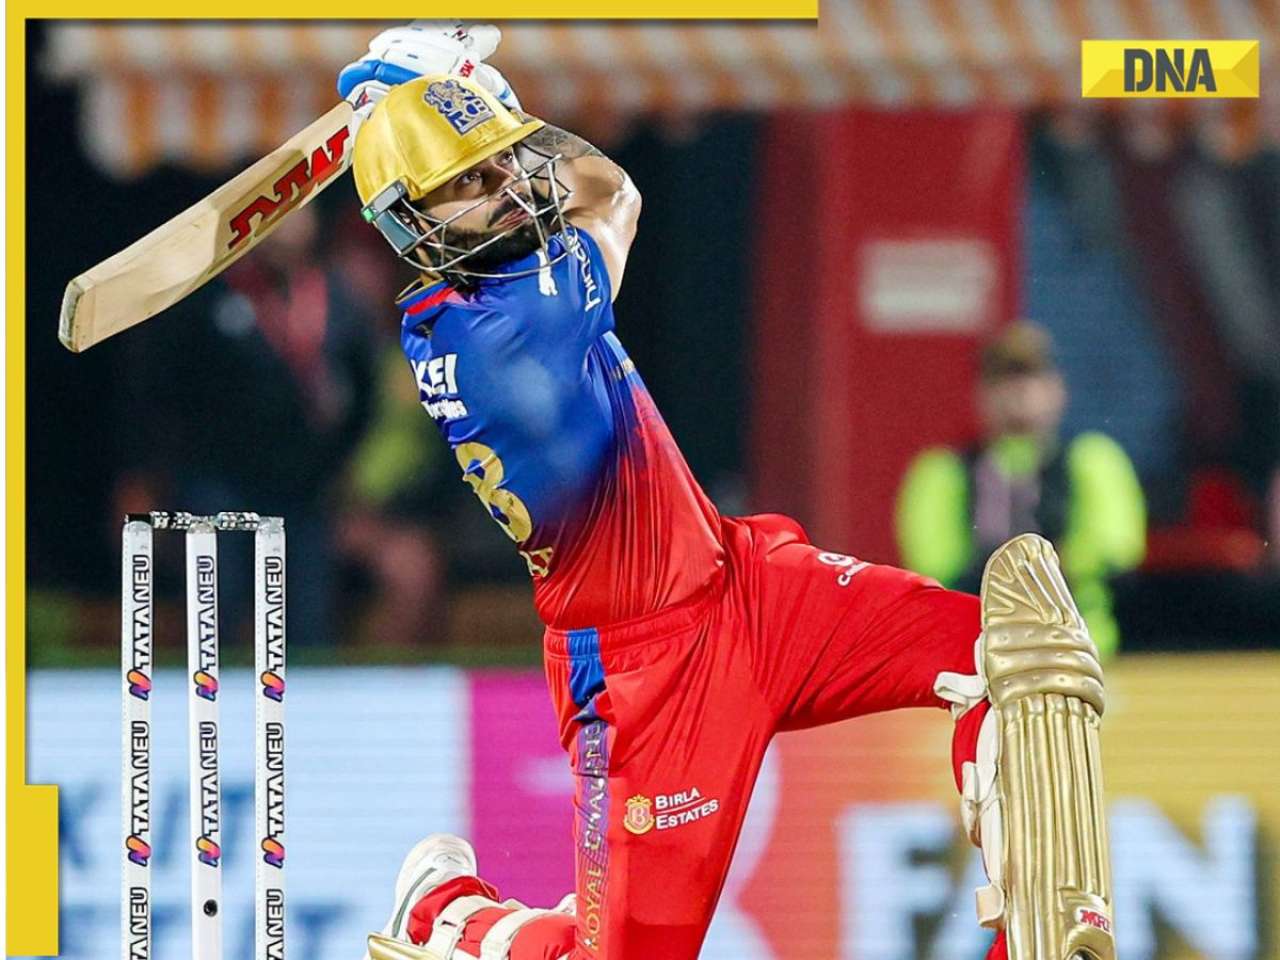 PBKS vs RCB: Virat Kohli scripts history, becomes first batter to achieve this record in IPL